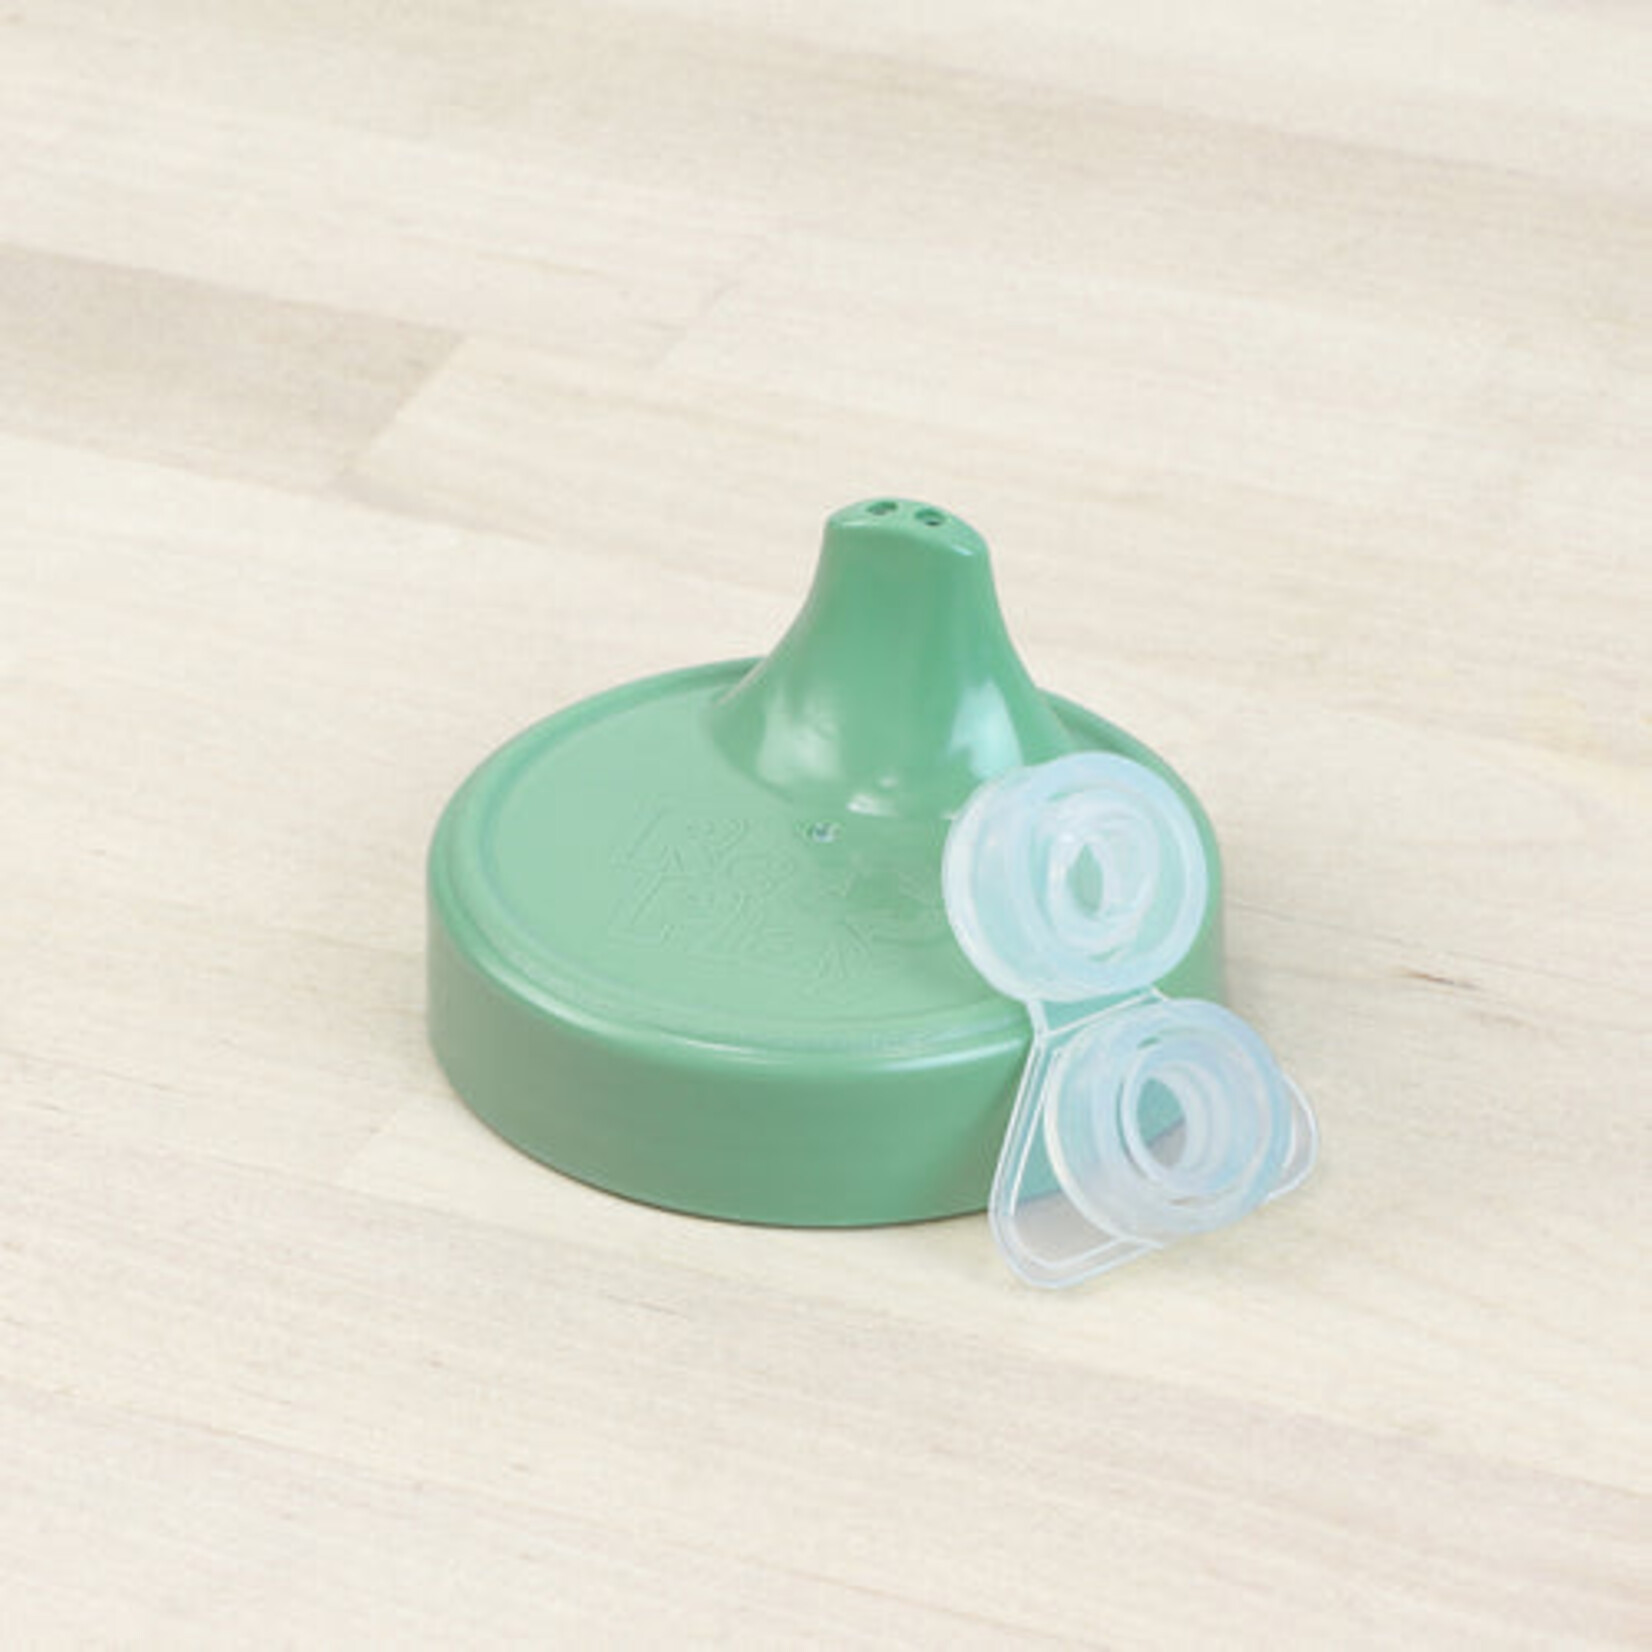 REPLAY NO SPILL SIPPY CUP REVIEW